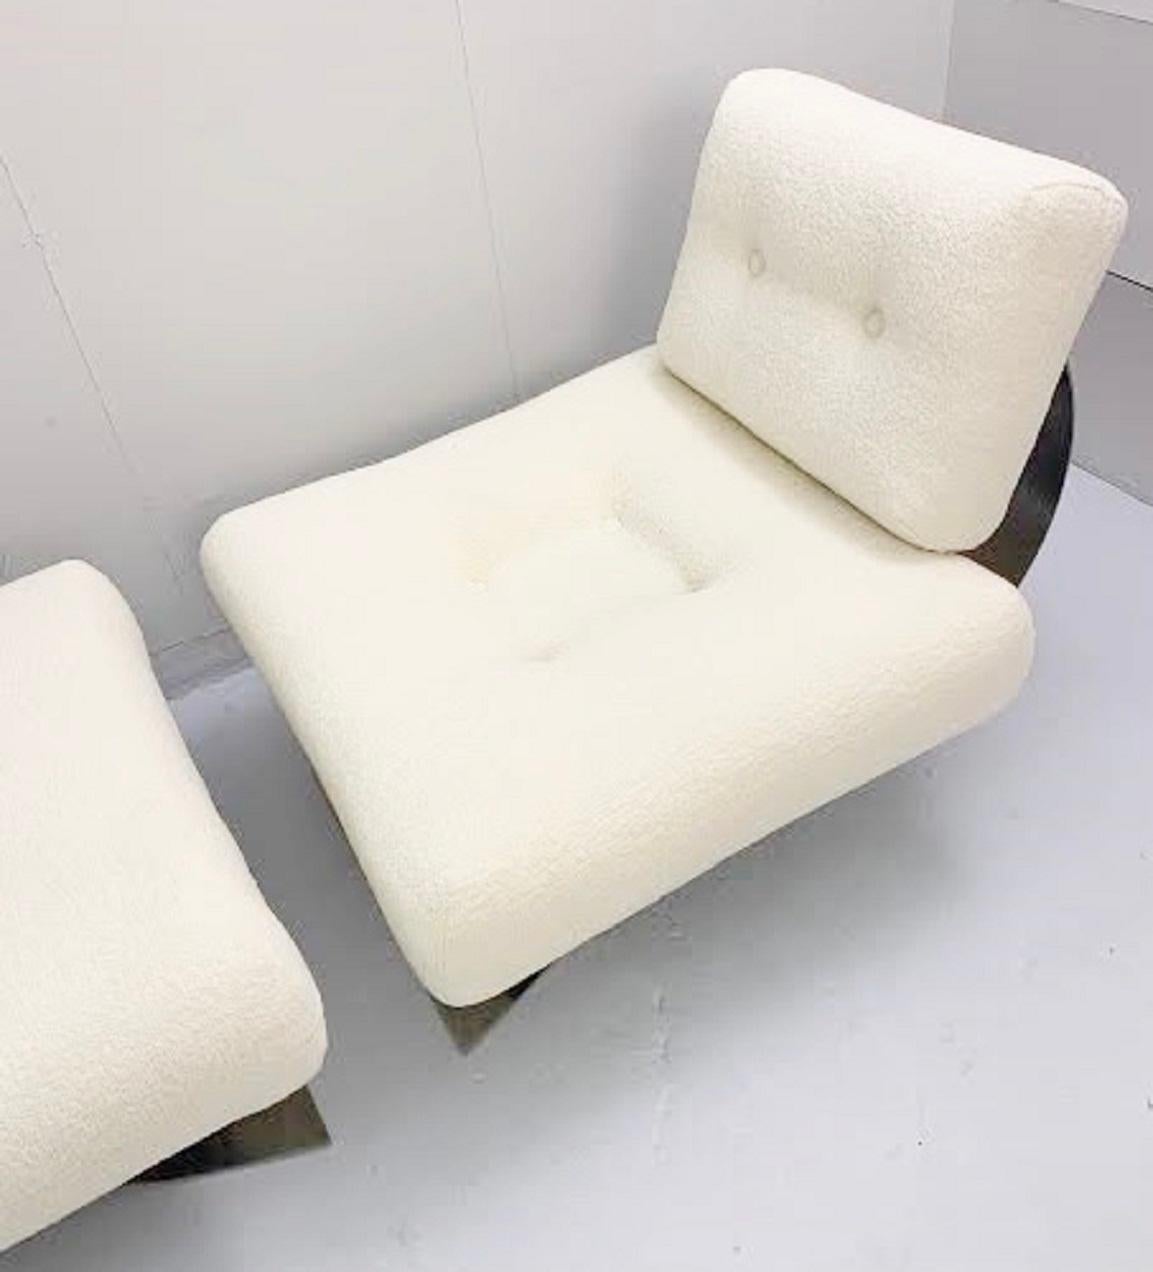 Lounge chair and ottoman by Oscar Niemeyer for Mobilier International, 1975.Lounge chair and ottoman by Oscar Niemeyer for Mobilier International, 1975.